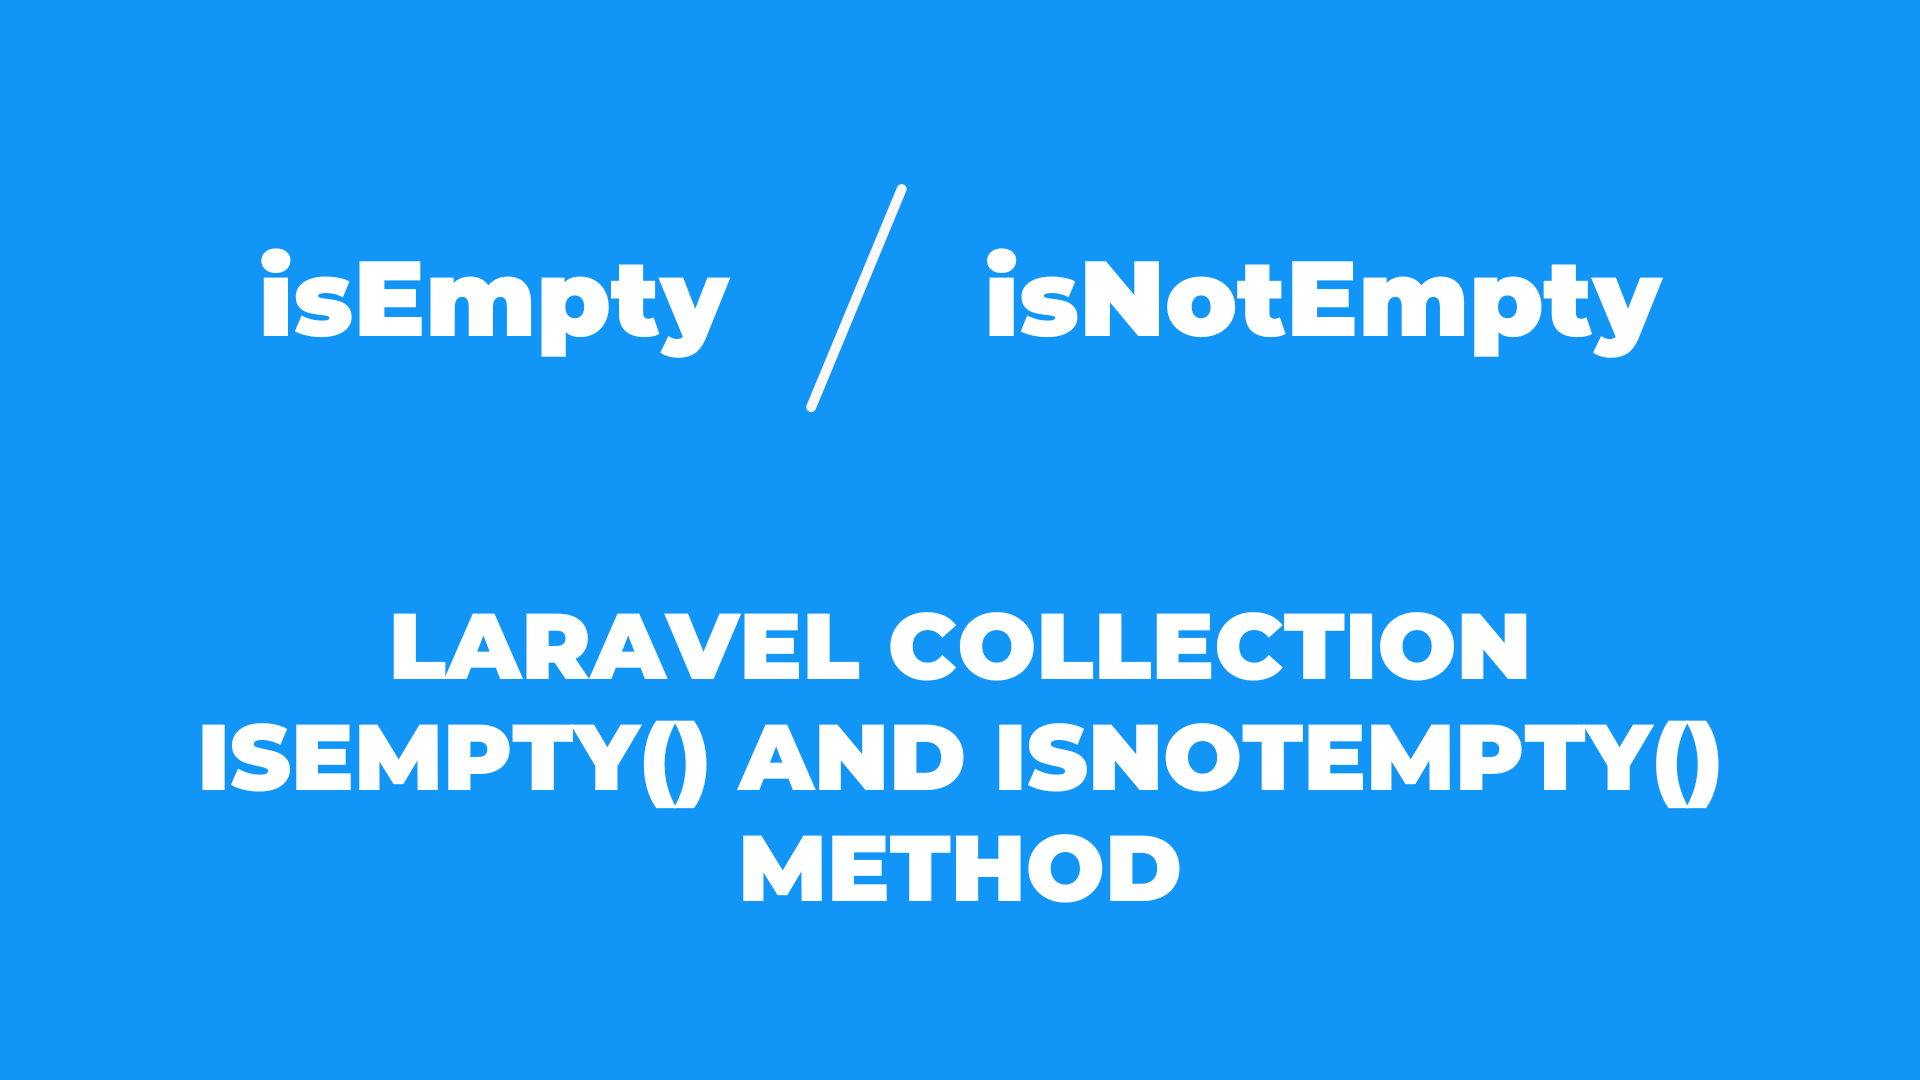 Laravel Collection isEmpty() and isNotEmpty() Method